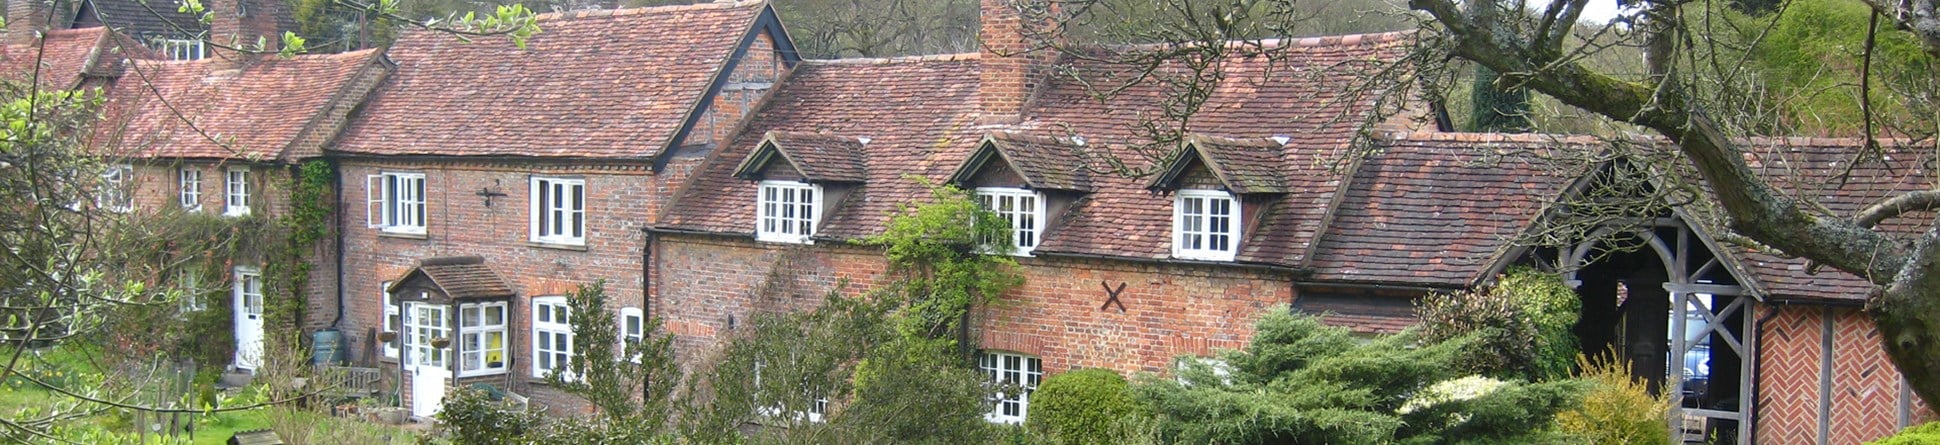 A row if houses in Ringshall, Hertfordshire